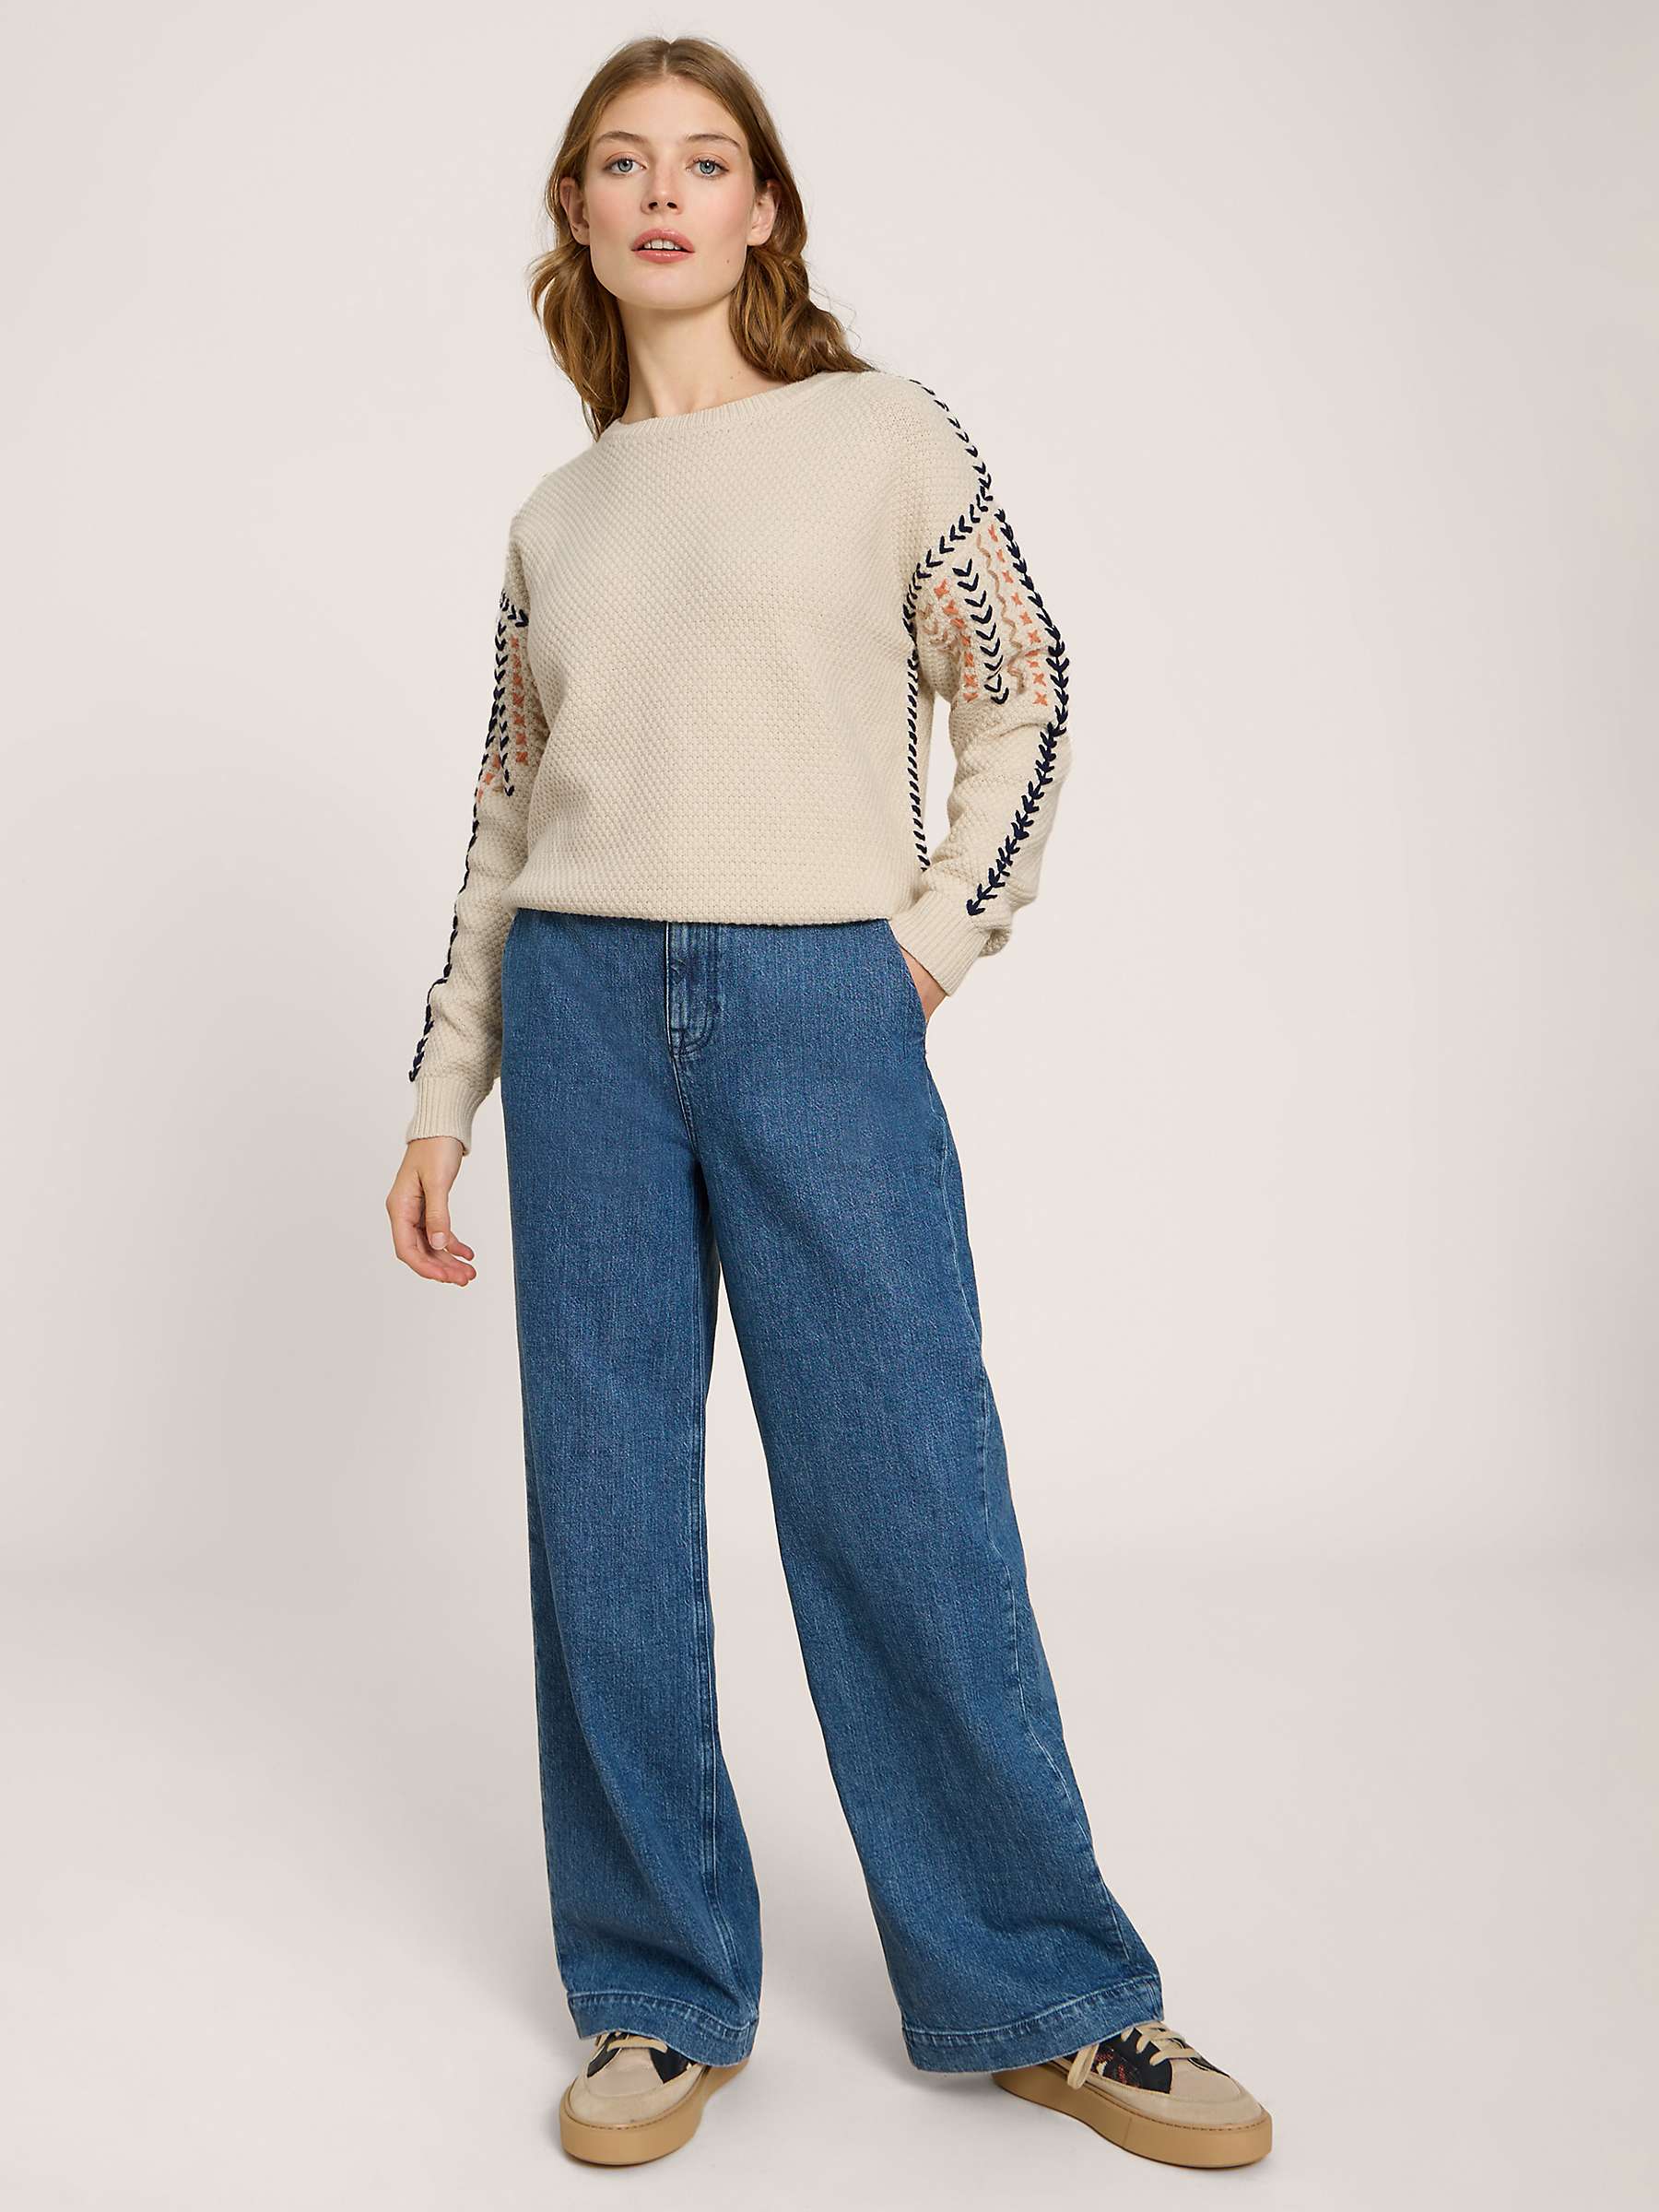 White Stuff Embroidered Jumper, Natural at John Lewis & Partners